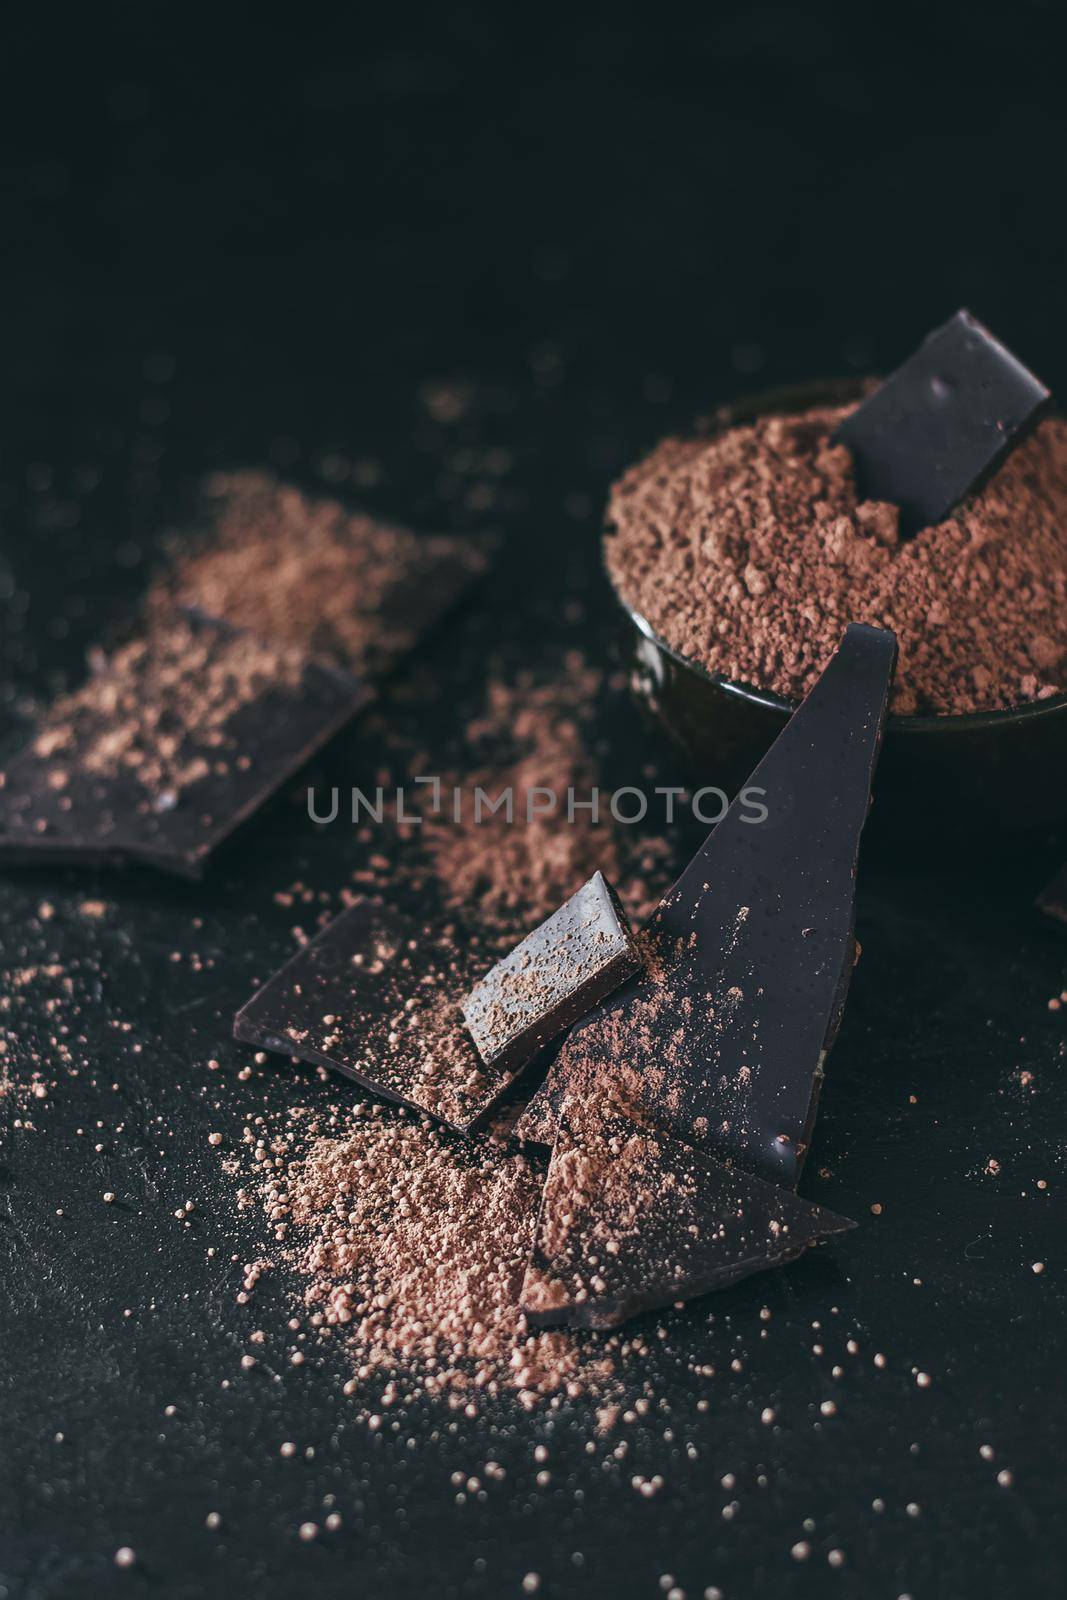 Chocolate bar pieces with cocoa powder on dark background, cope space by mmp1206